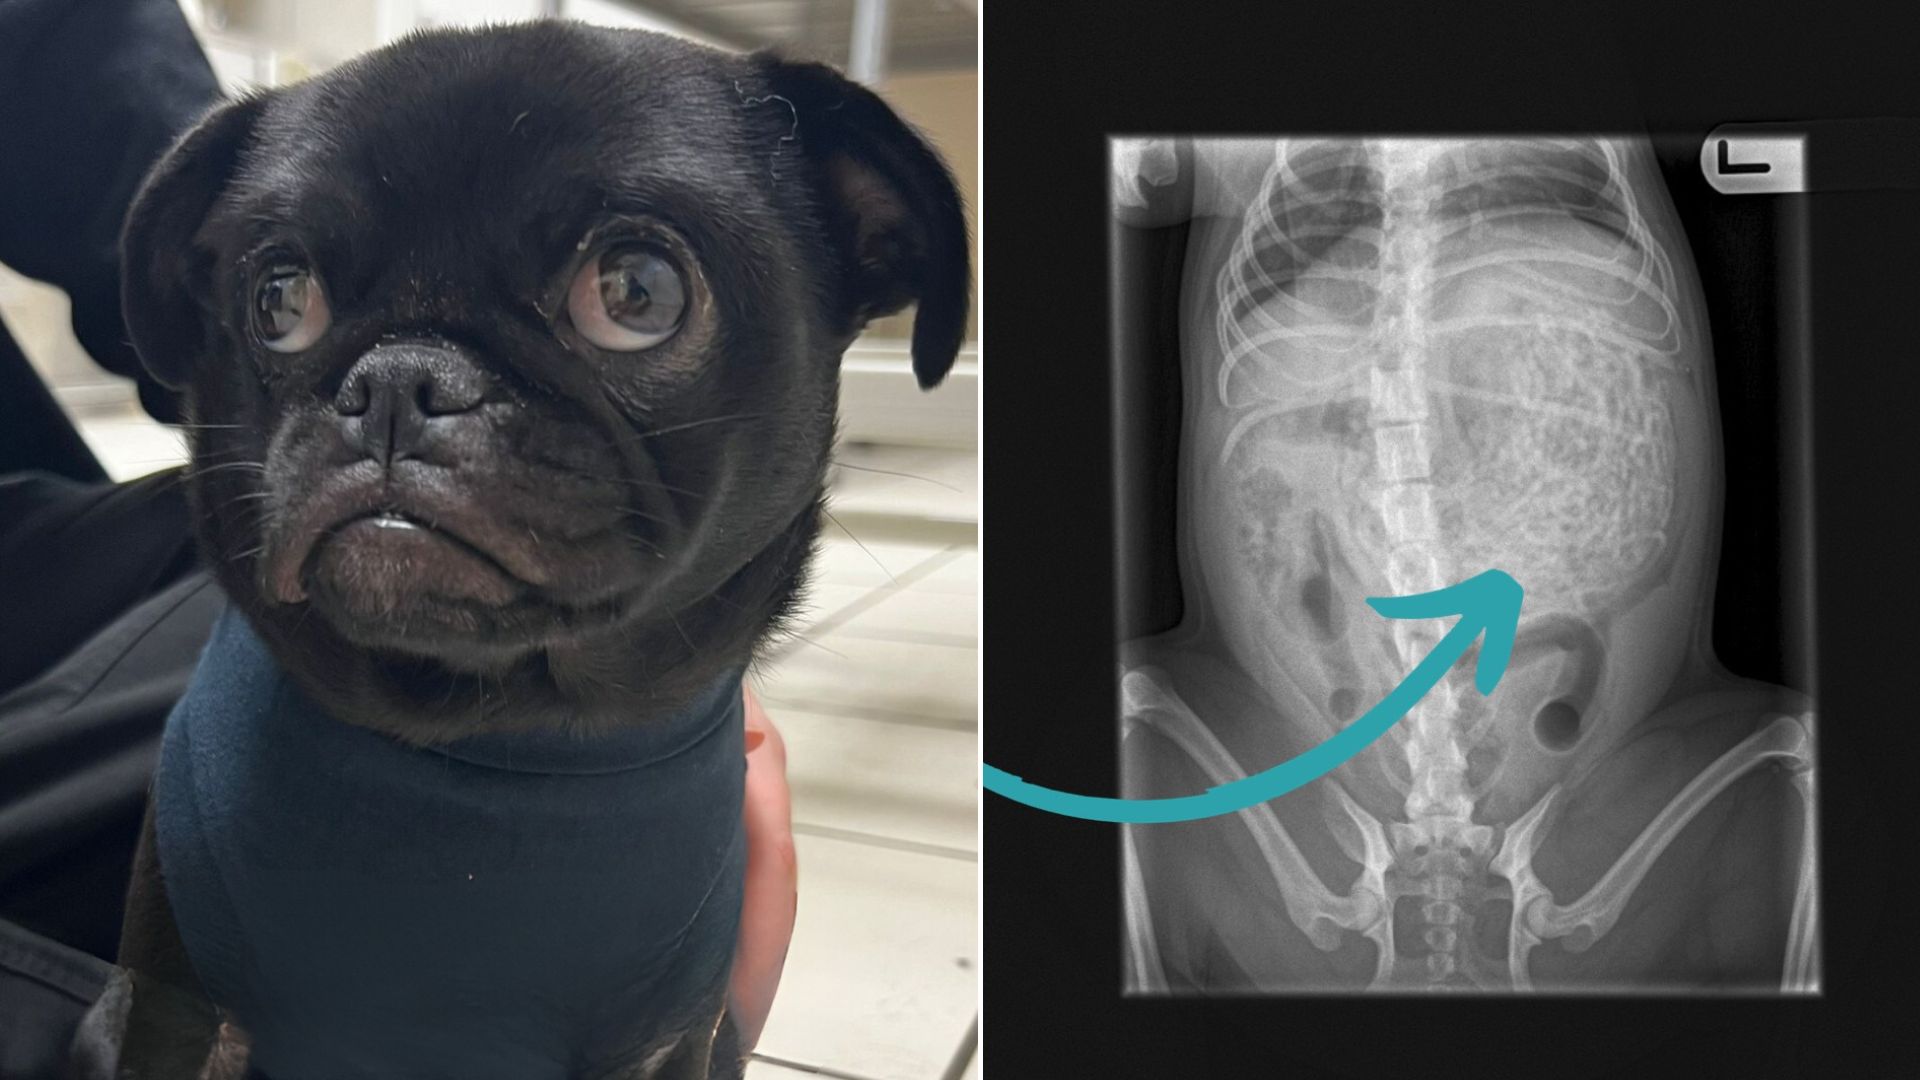 When Mom Took Her Unwell Dog To The Vet, She Couldn’t Believe What The X-Rays Found